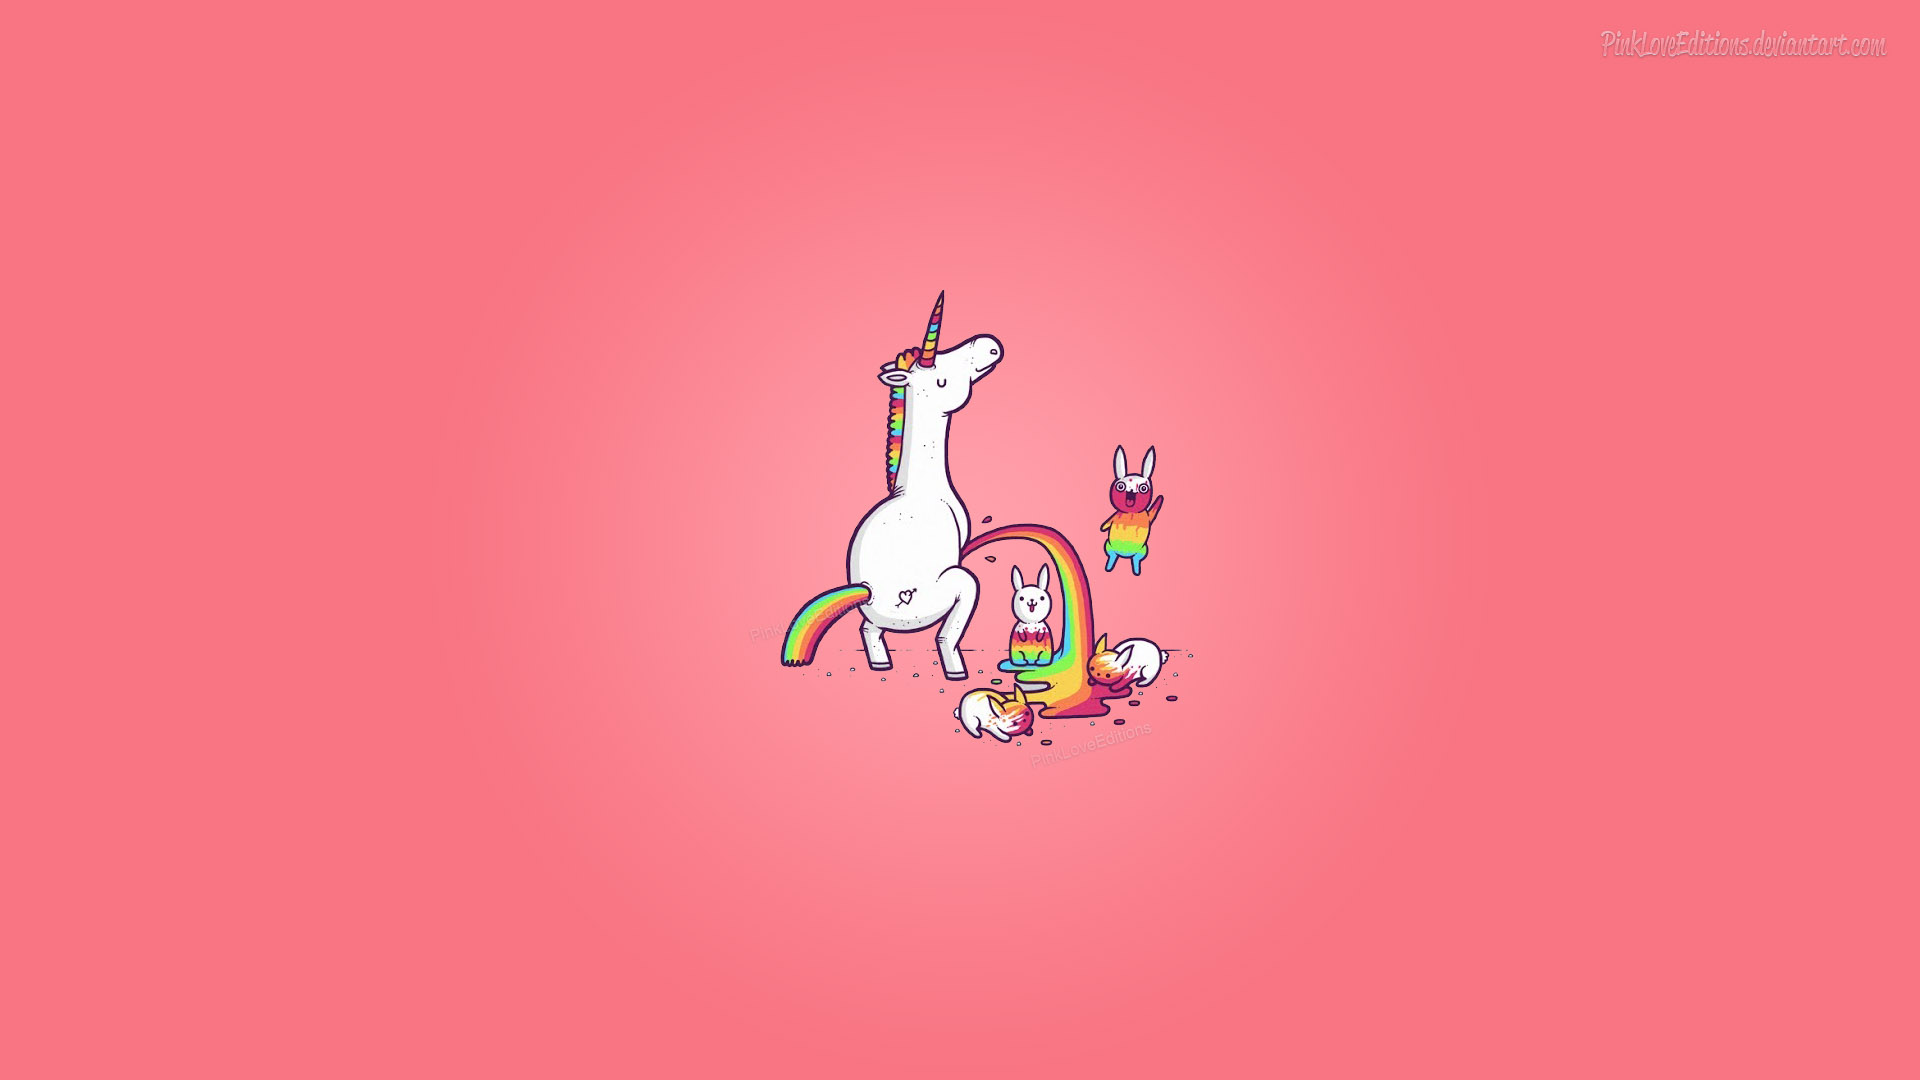 Cute Unicorn Wallpaper Hd Wallpapers Pictures 1920x1080